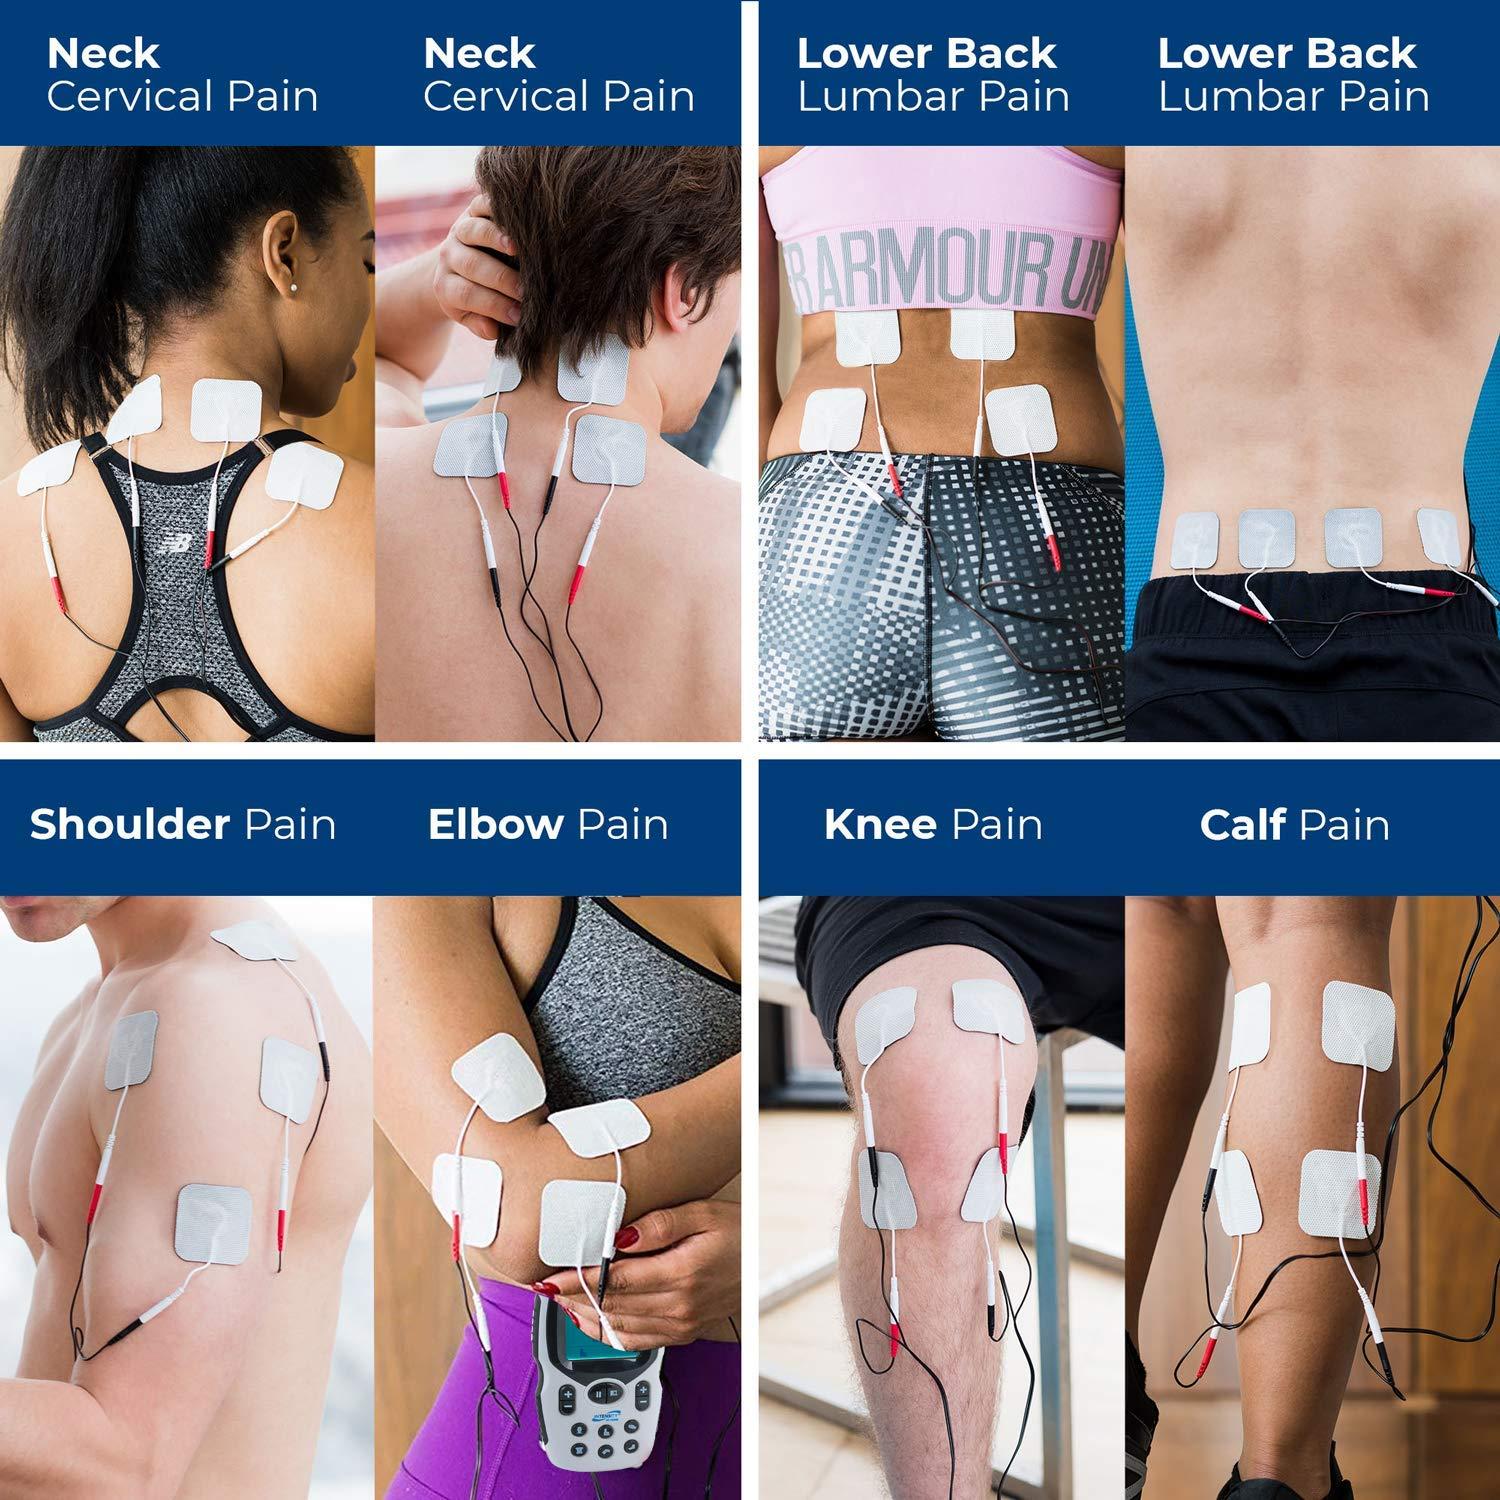 Upper Back Physical Therapy with TENS Electrode Pads, Transcutaneous  Electrical Nerve Stimulation - Mile High Spine & Pain Center